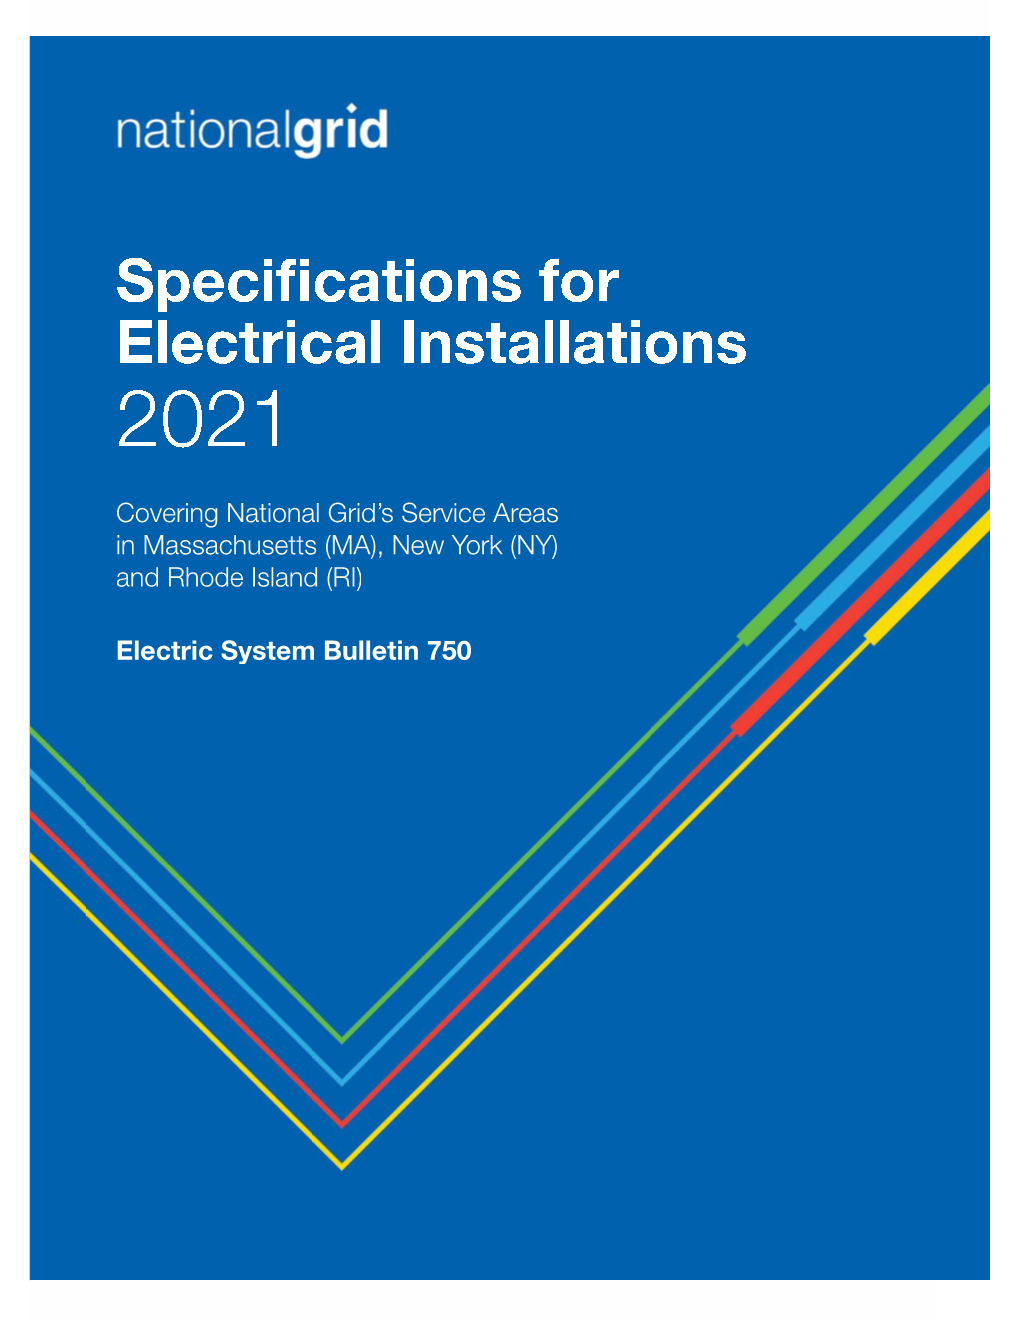 Specifications for Electrical Installations 2021 Covering National Grid’S Service Areas in Massachusetts (MA), New York (NY) and Rhode Island (RI)